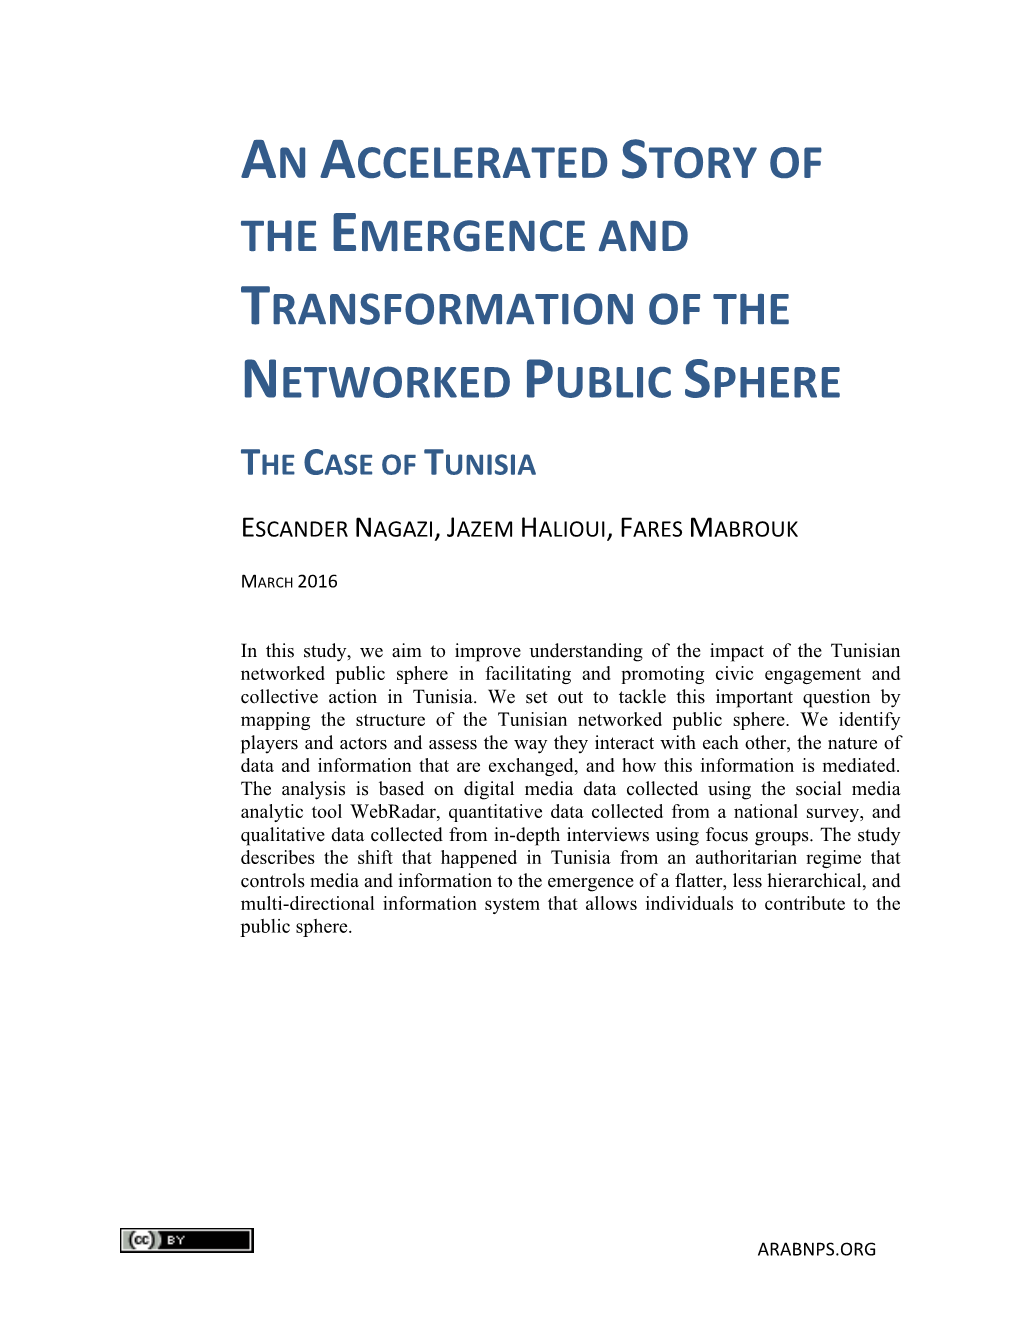 An Accelerated Story of the Emergence and Transformation of the Networked Public Sphere